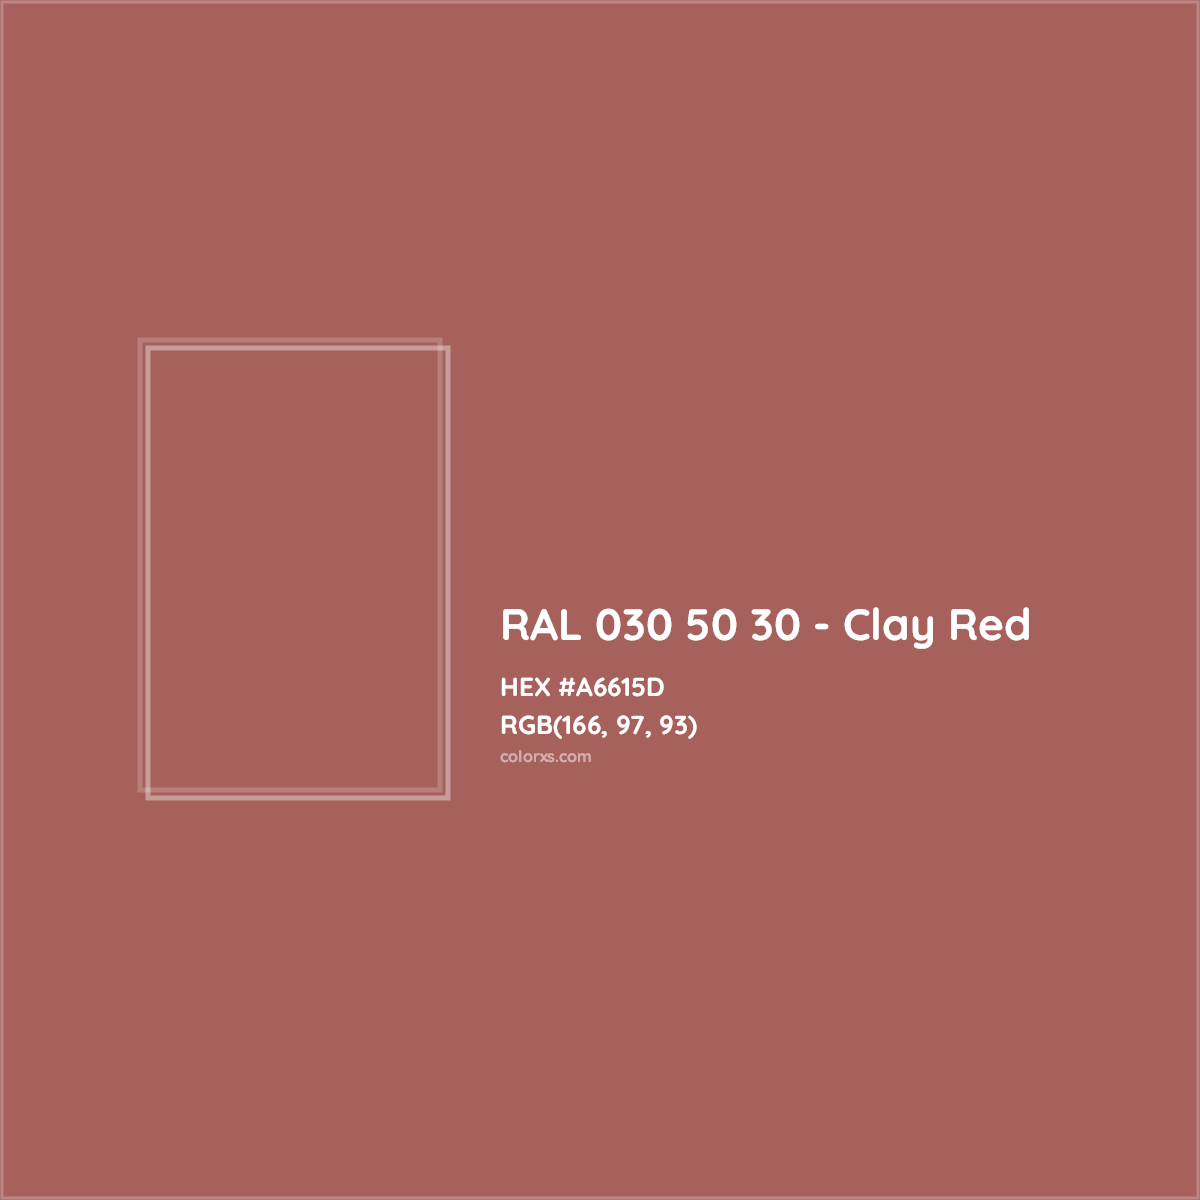 HEX #A6615D RAL 030 50 30 - Clay Red CMS RAL Design - Color Code